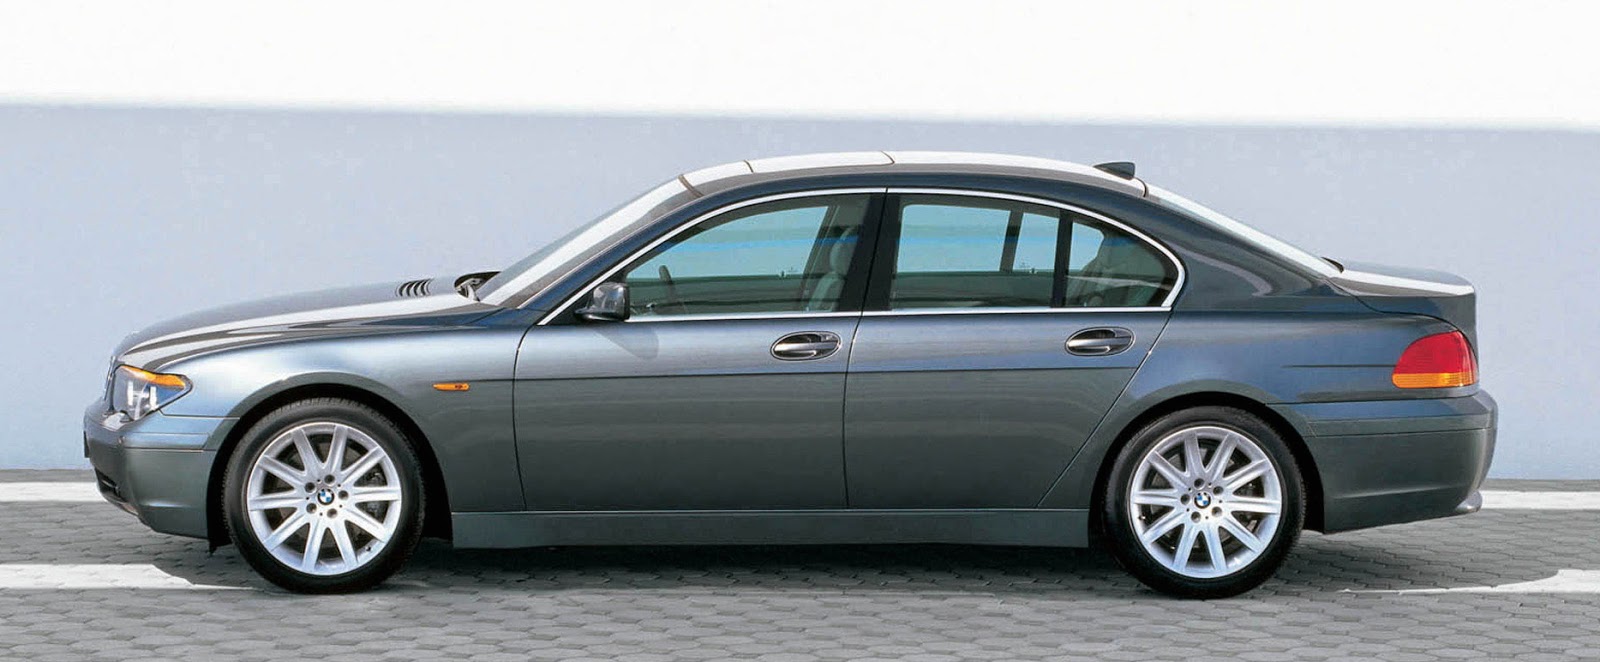 BMW 7 Series 4th (E65) Generation Exterior Side View